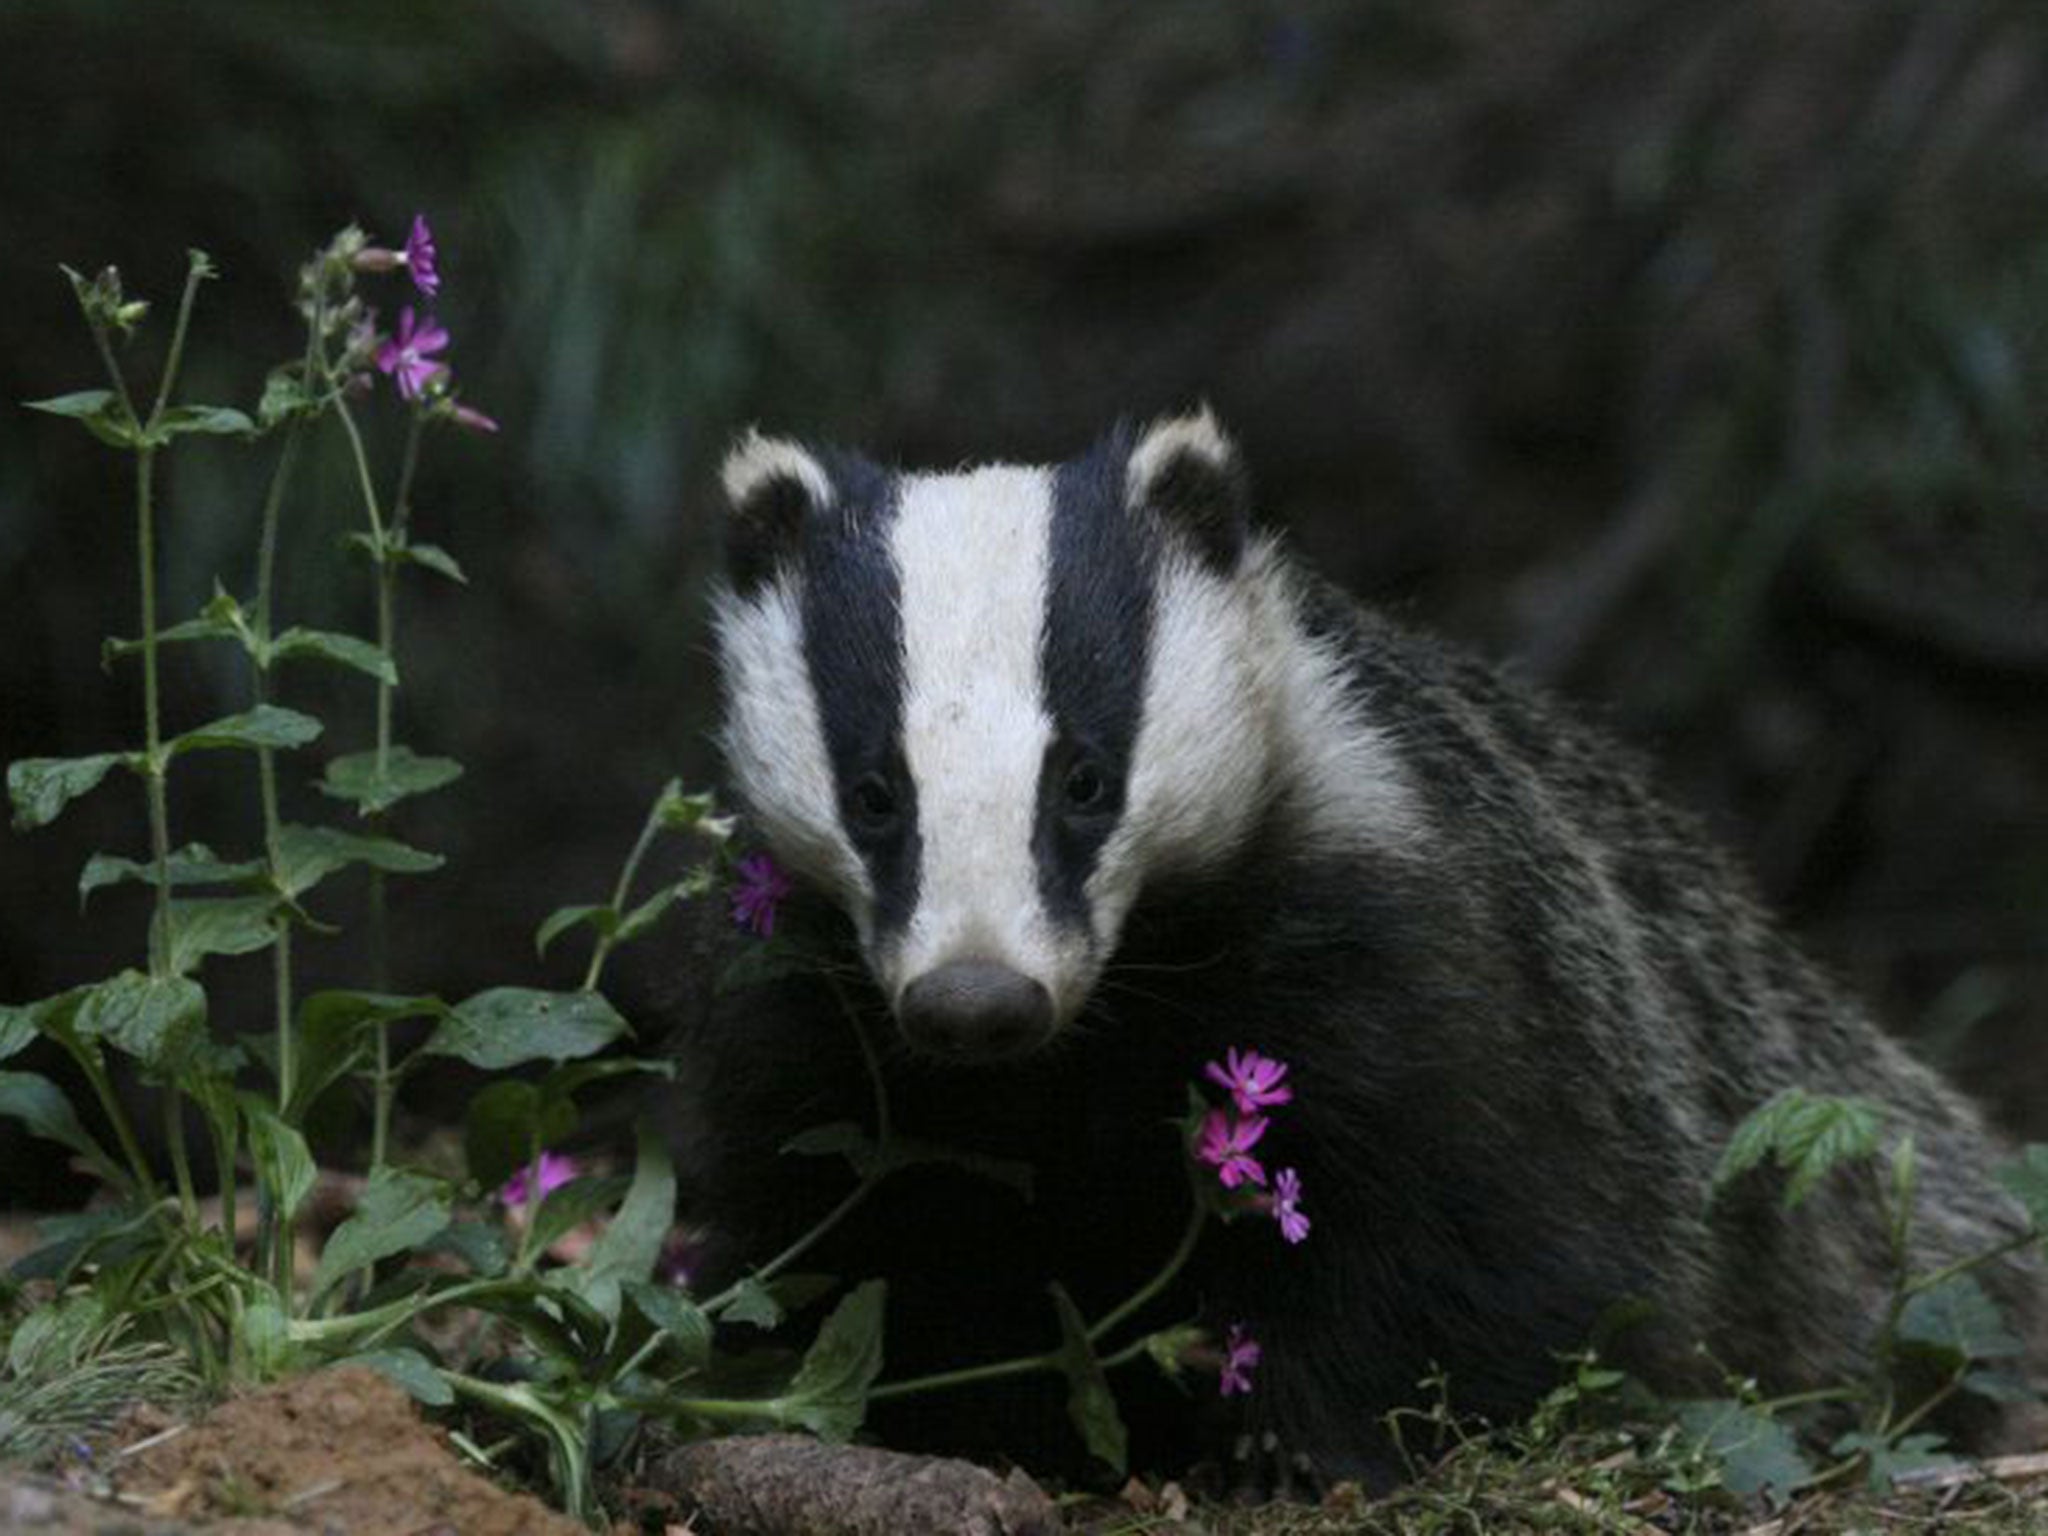 A report by the IEP raised concerns about the effectiveness of the culls and warned badgers were suffering slow deaths after being shot